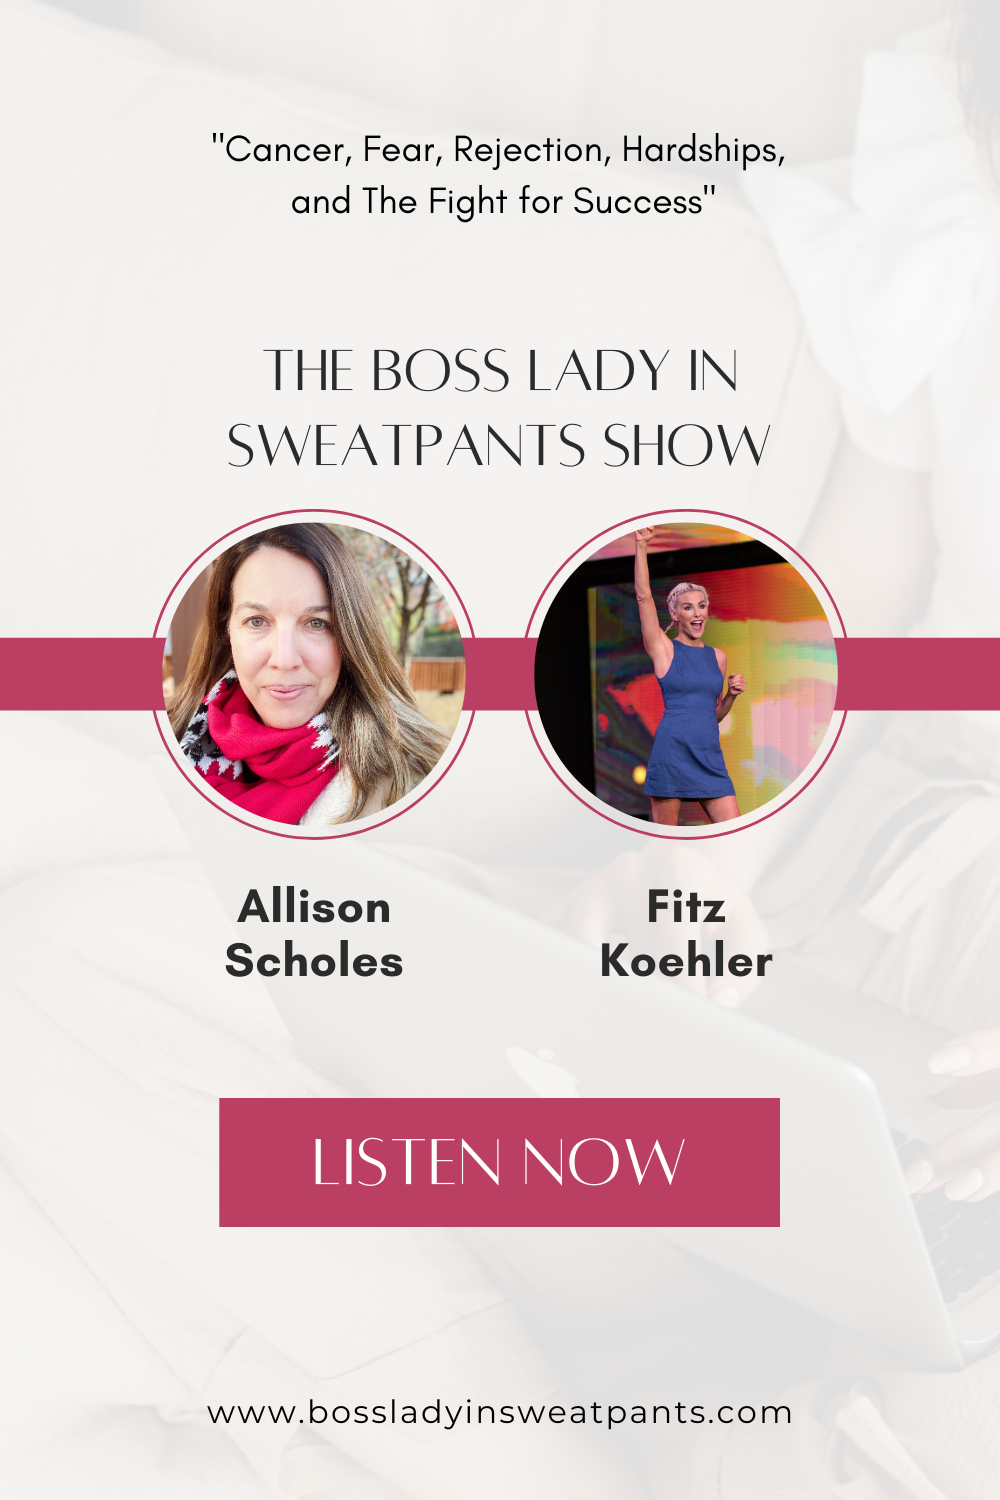 graphic with 2 women: Allison Scholes and Fitz Koehler for The Boss Lady in Sweatpants Show: Cancer, Fear, Rejection, Hardships, and The Fight for Success